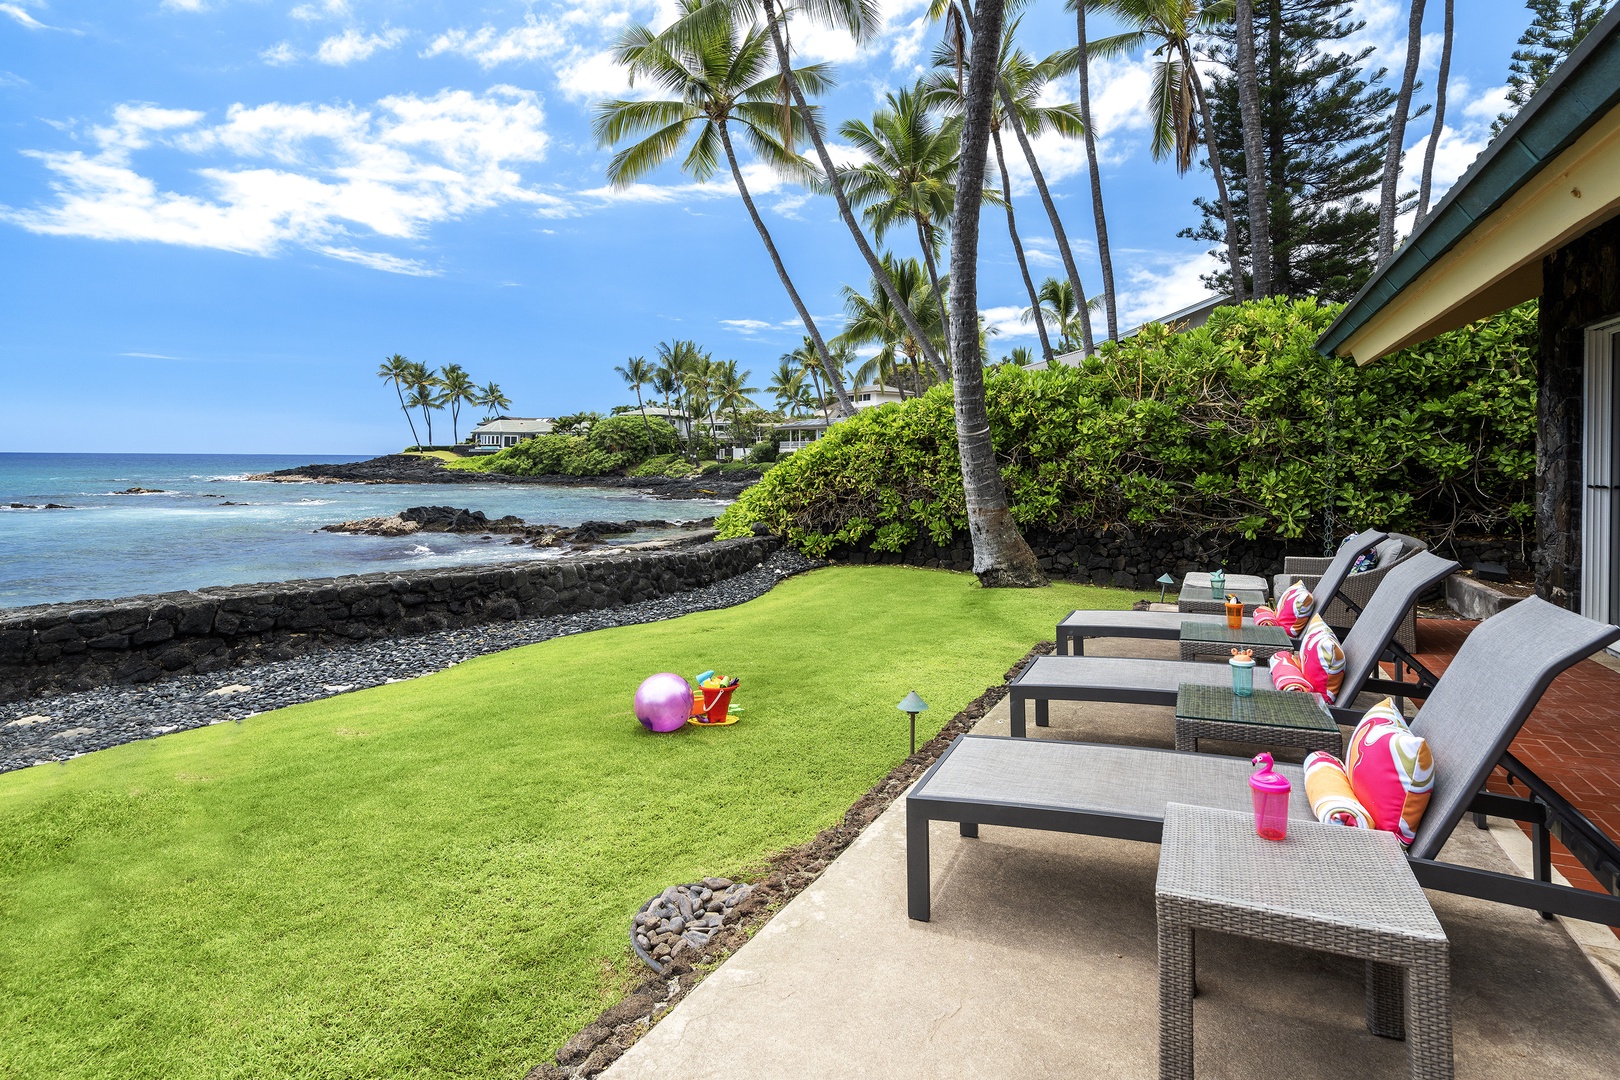 Kailua Kona Vacation Rentals, Hale Pua - Enjoy your beverage of choice and take in the sun rays!